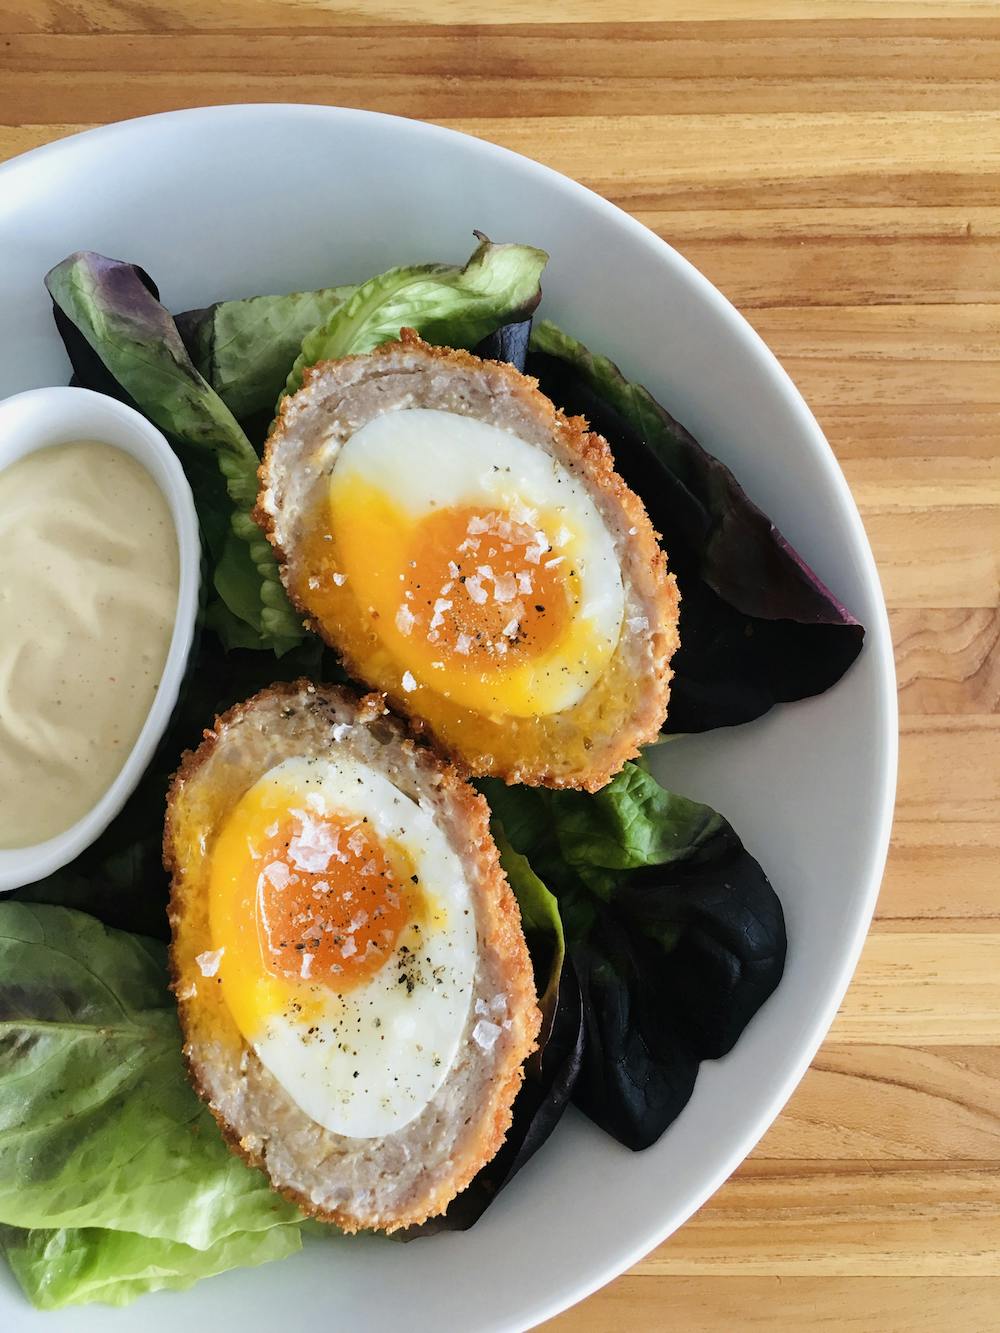 scotch eggs on a plate with salad and mustard sauce